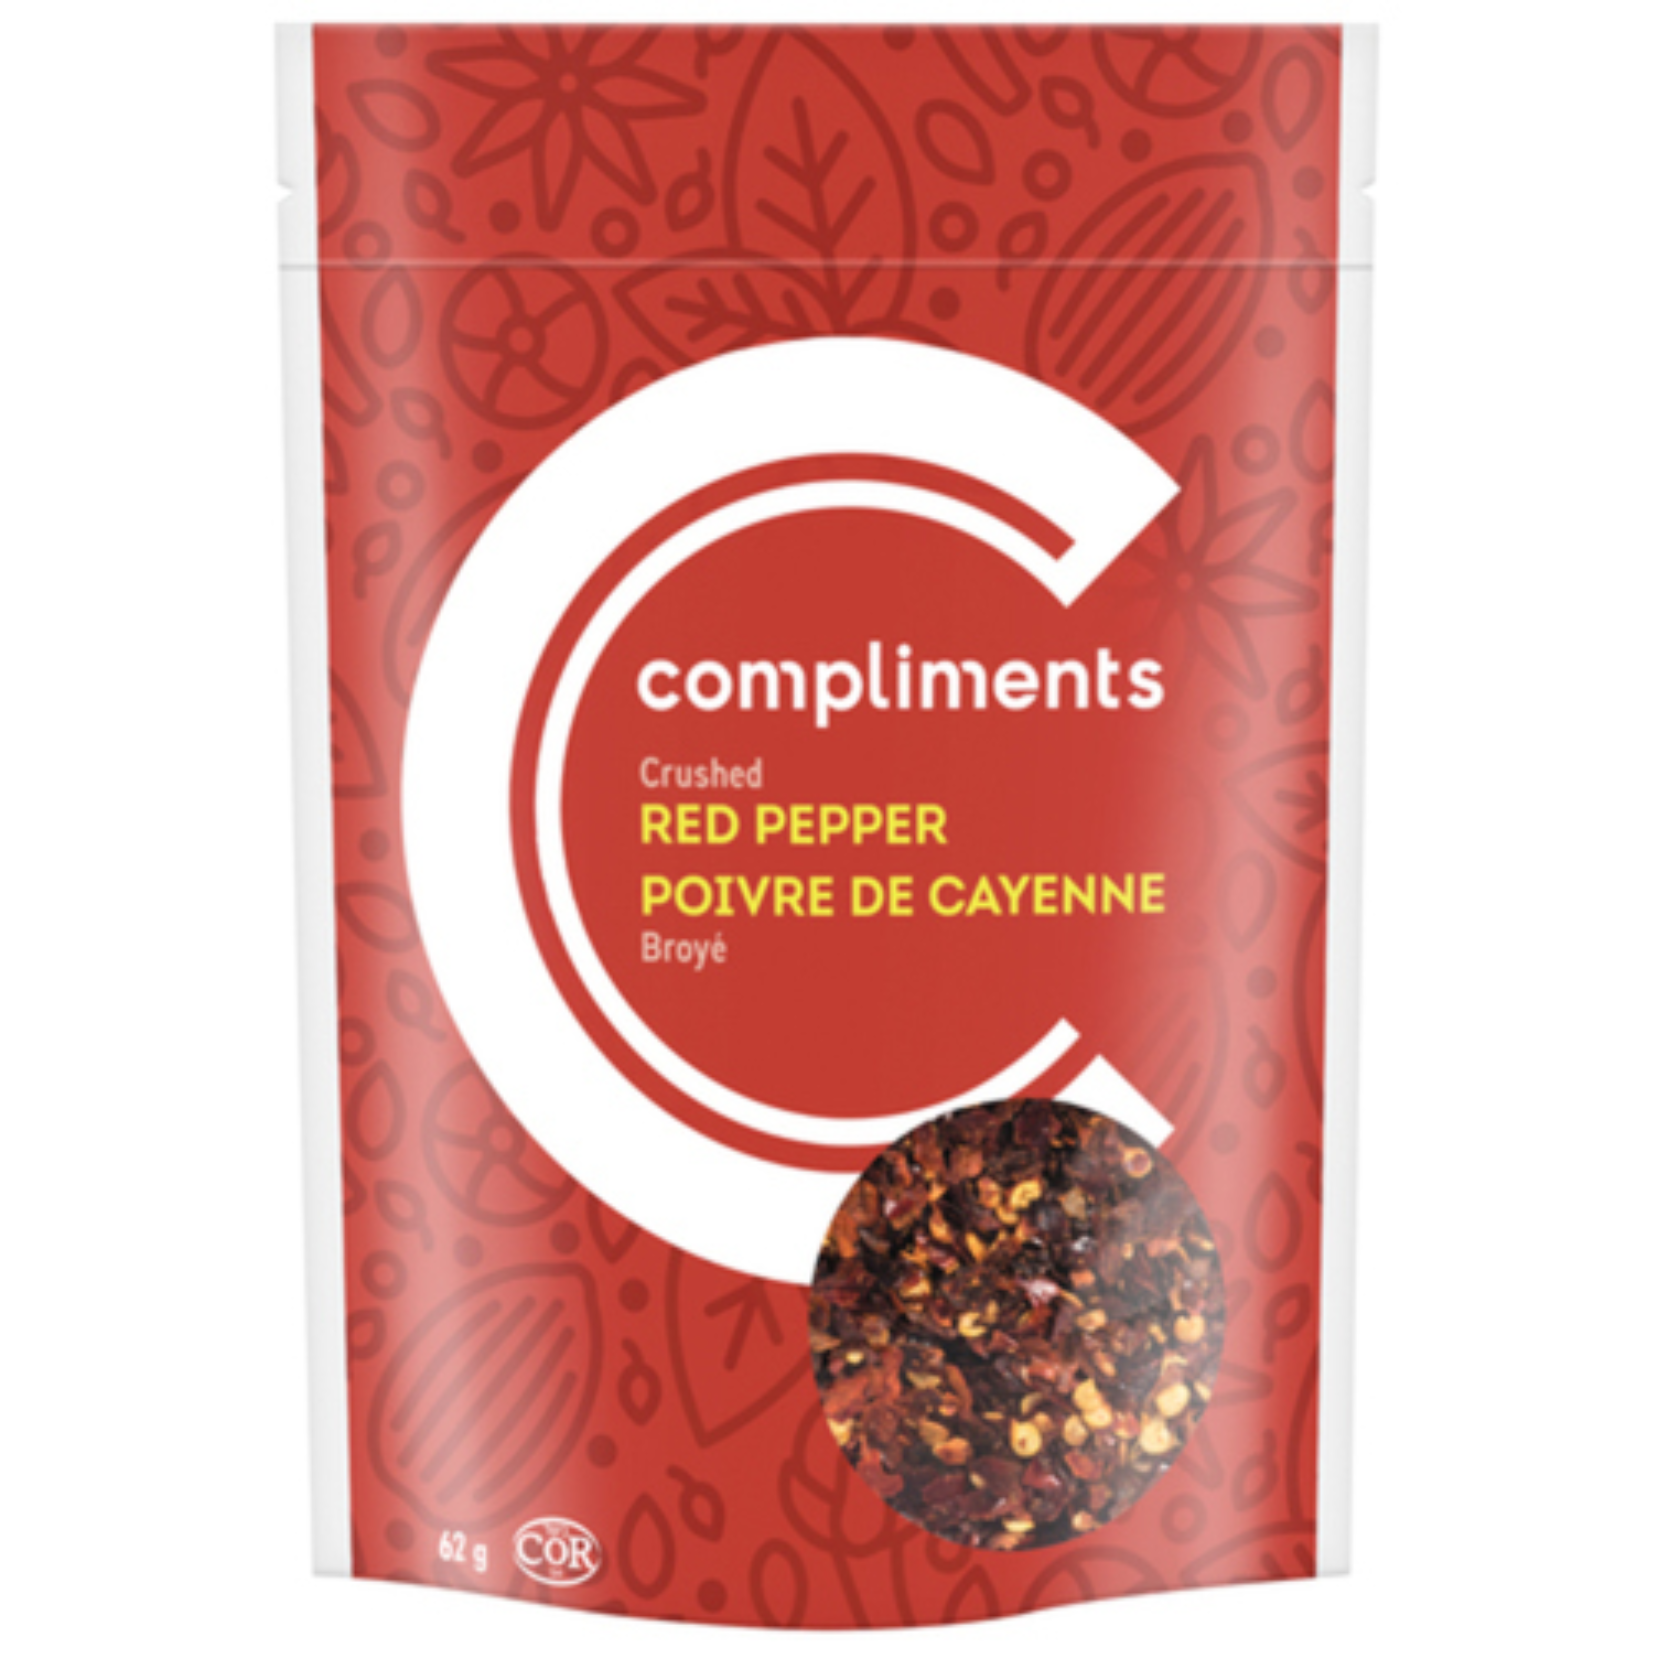 Compliments Crushed Red Peppers 62g